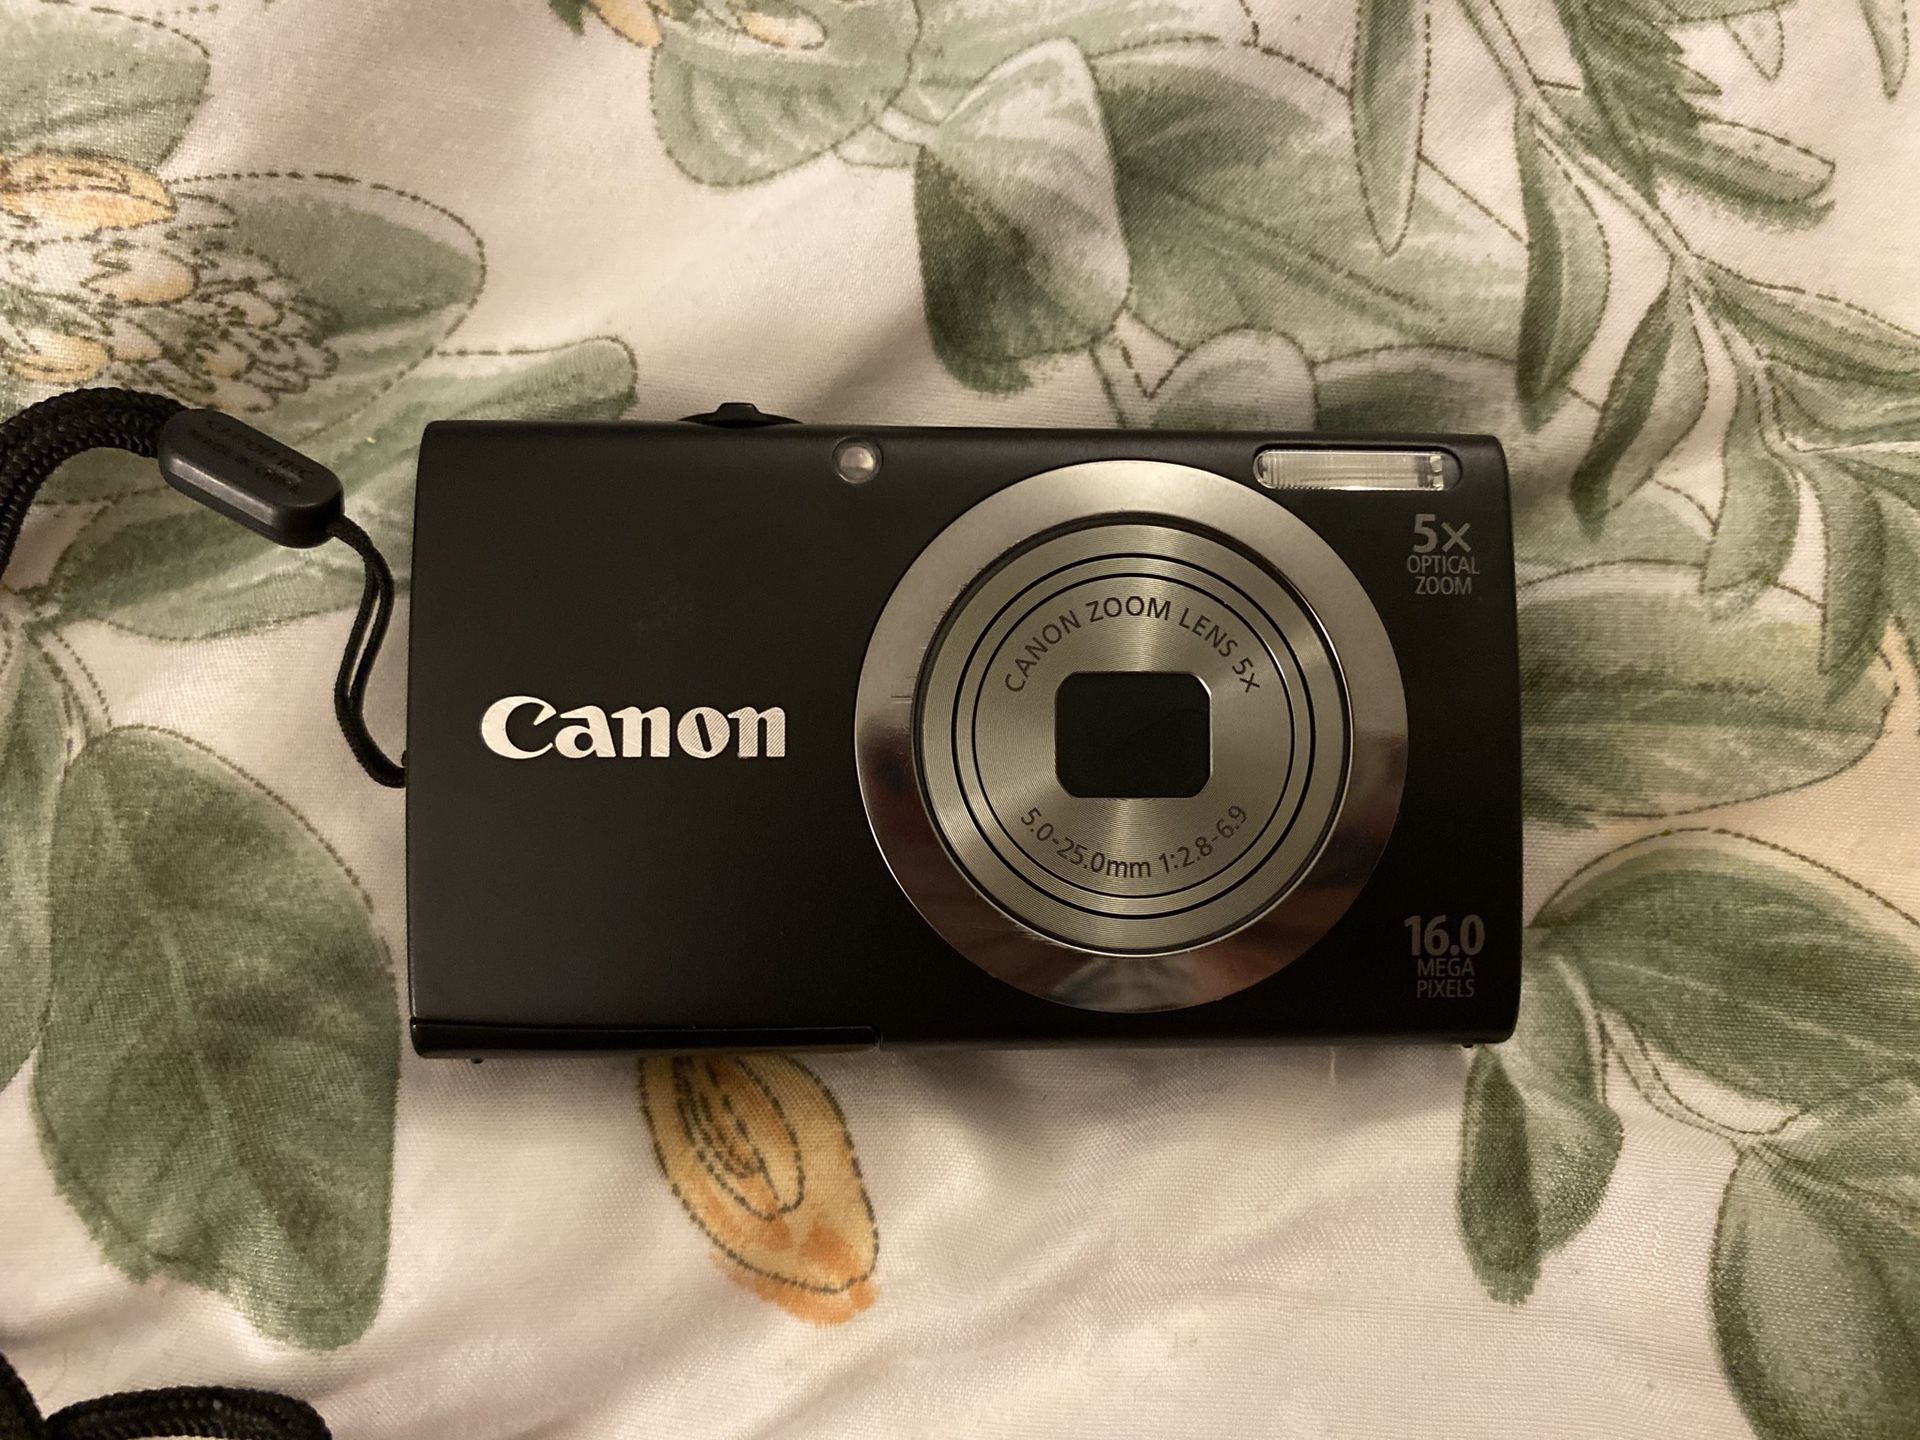 Canon Camera with 2 rechargeable batteries, Battery Charger, an Adapter, and a Case